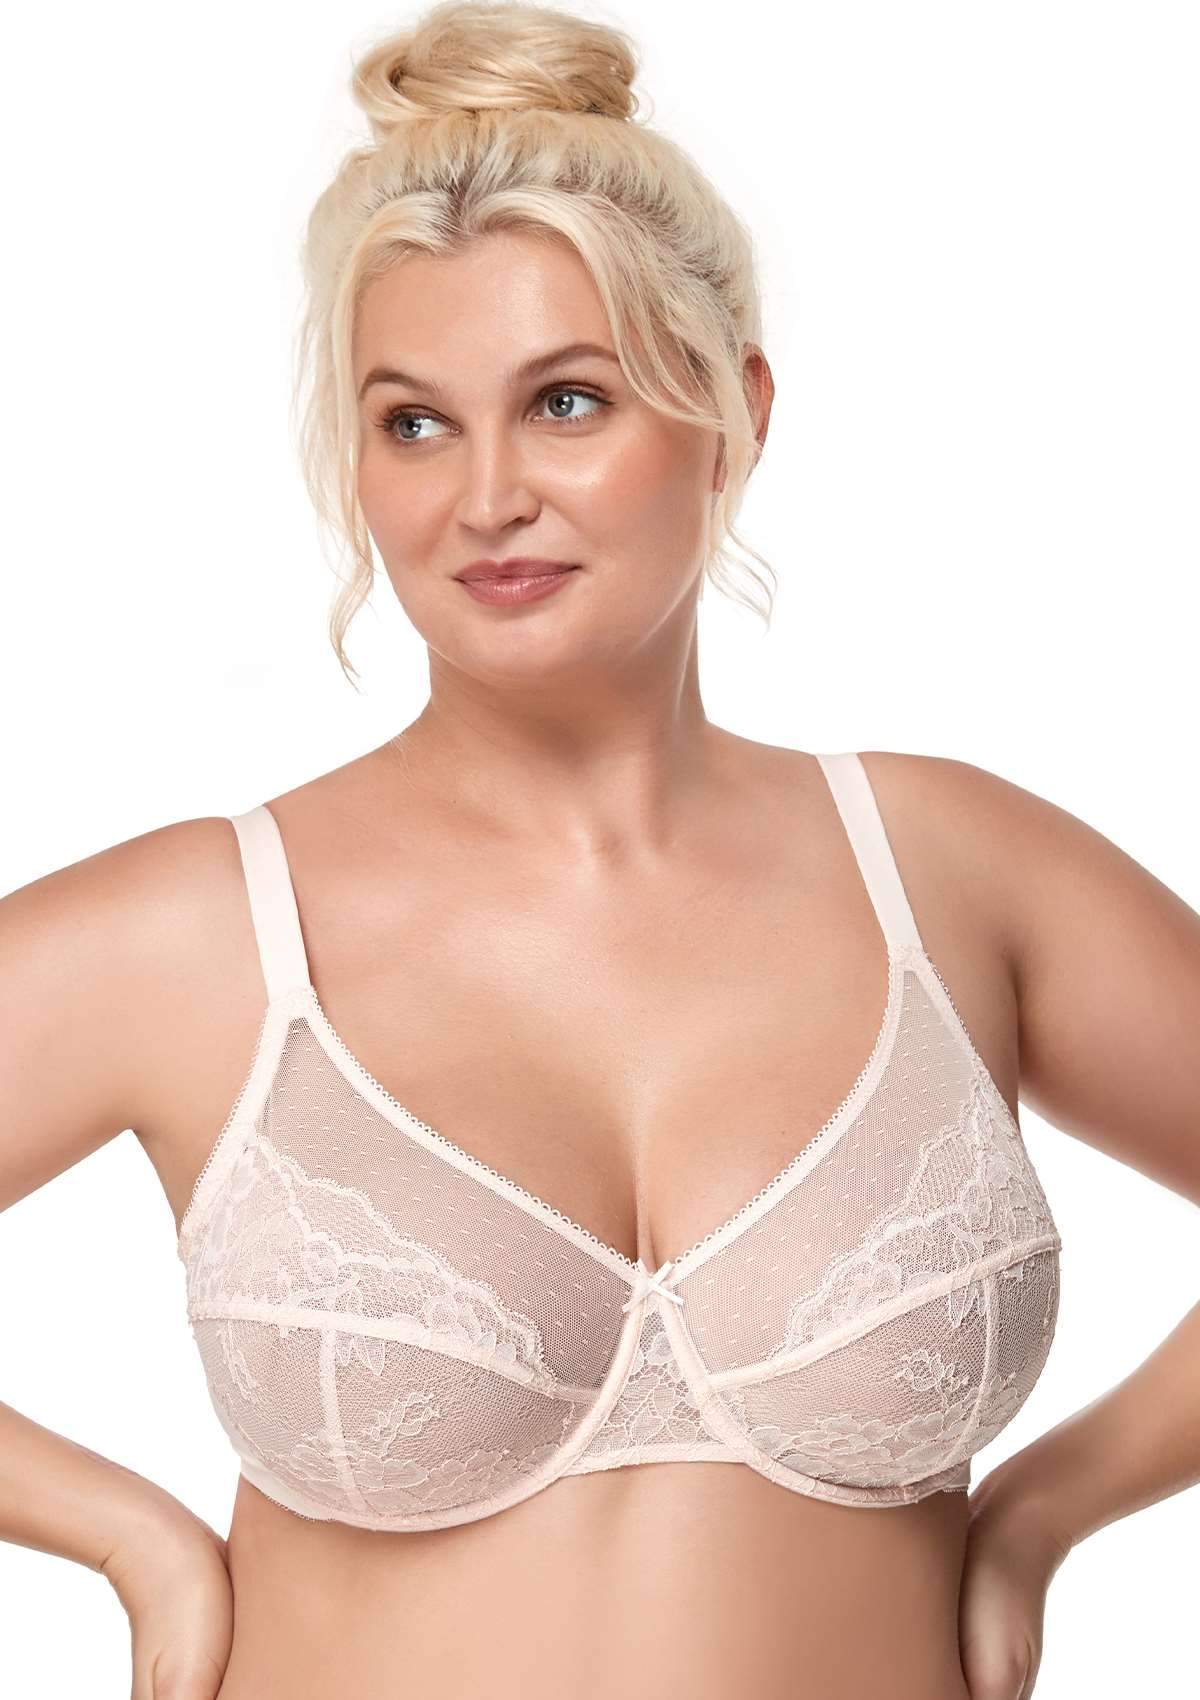 HSIA Enchante Lacy Bra: Comfy Sheer Lace Bra With Lift - Dusty Peach / 38 / I